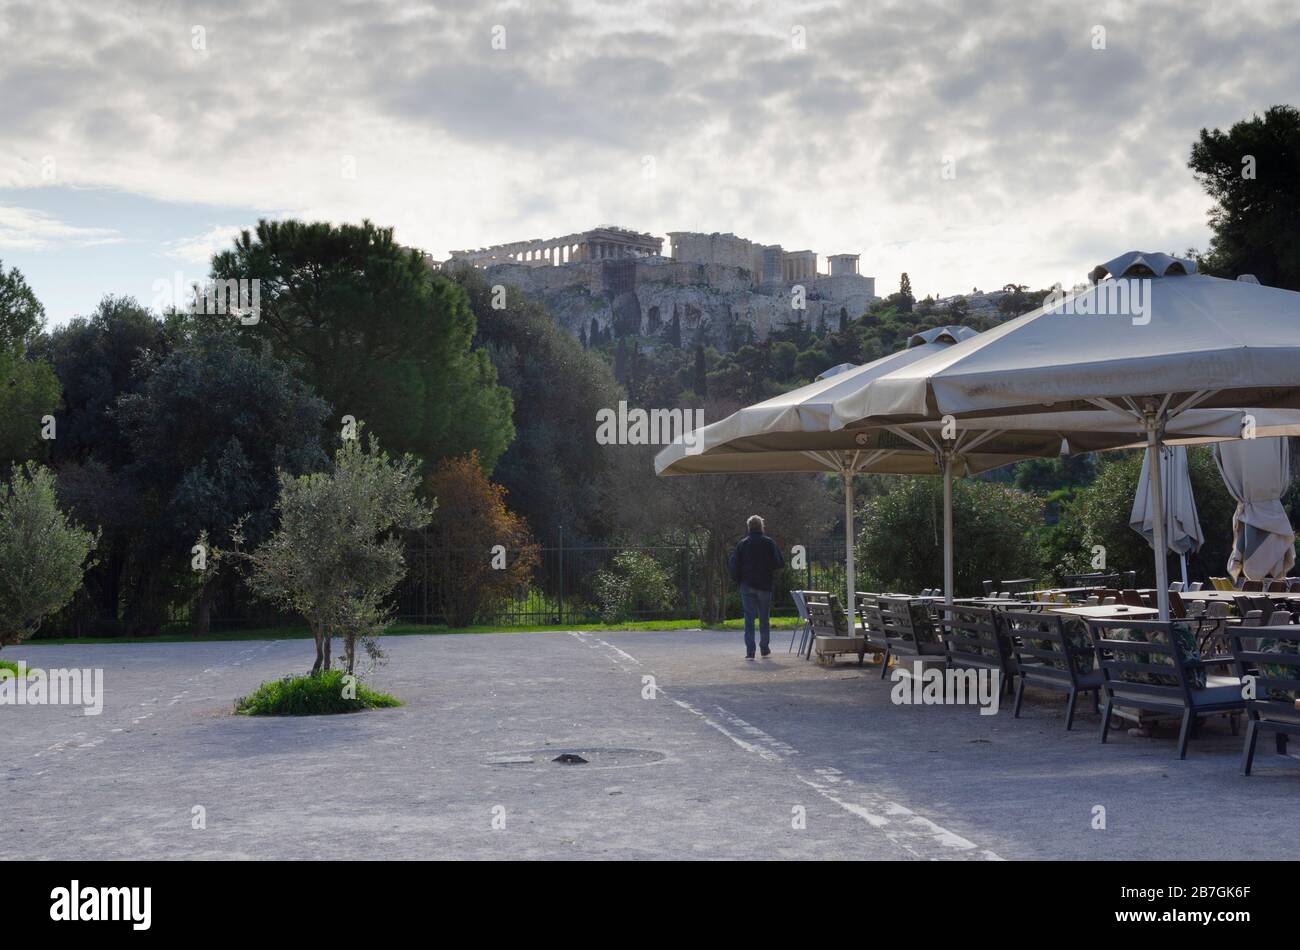 ATHENS, GREECE - 03 Mar 2020 - The Parthenon as viewed from Thissio in central Athens Greece Stock Photo